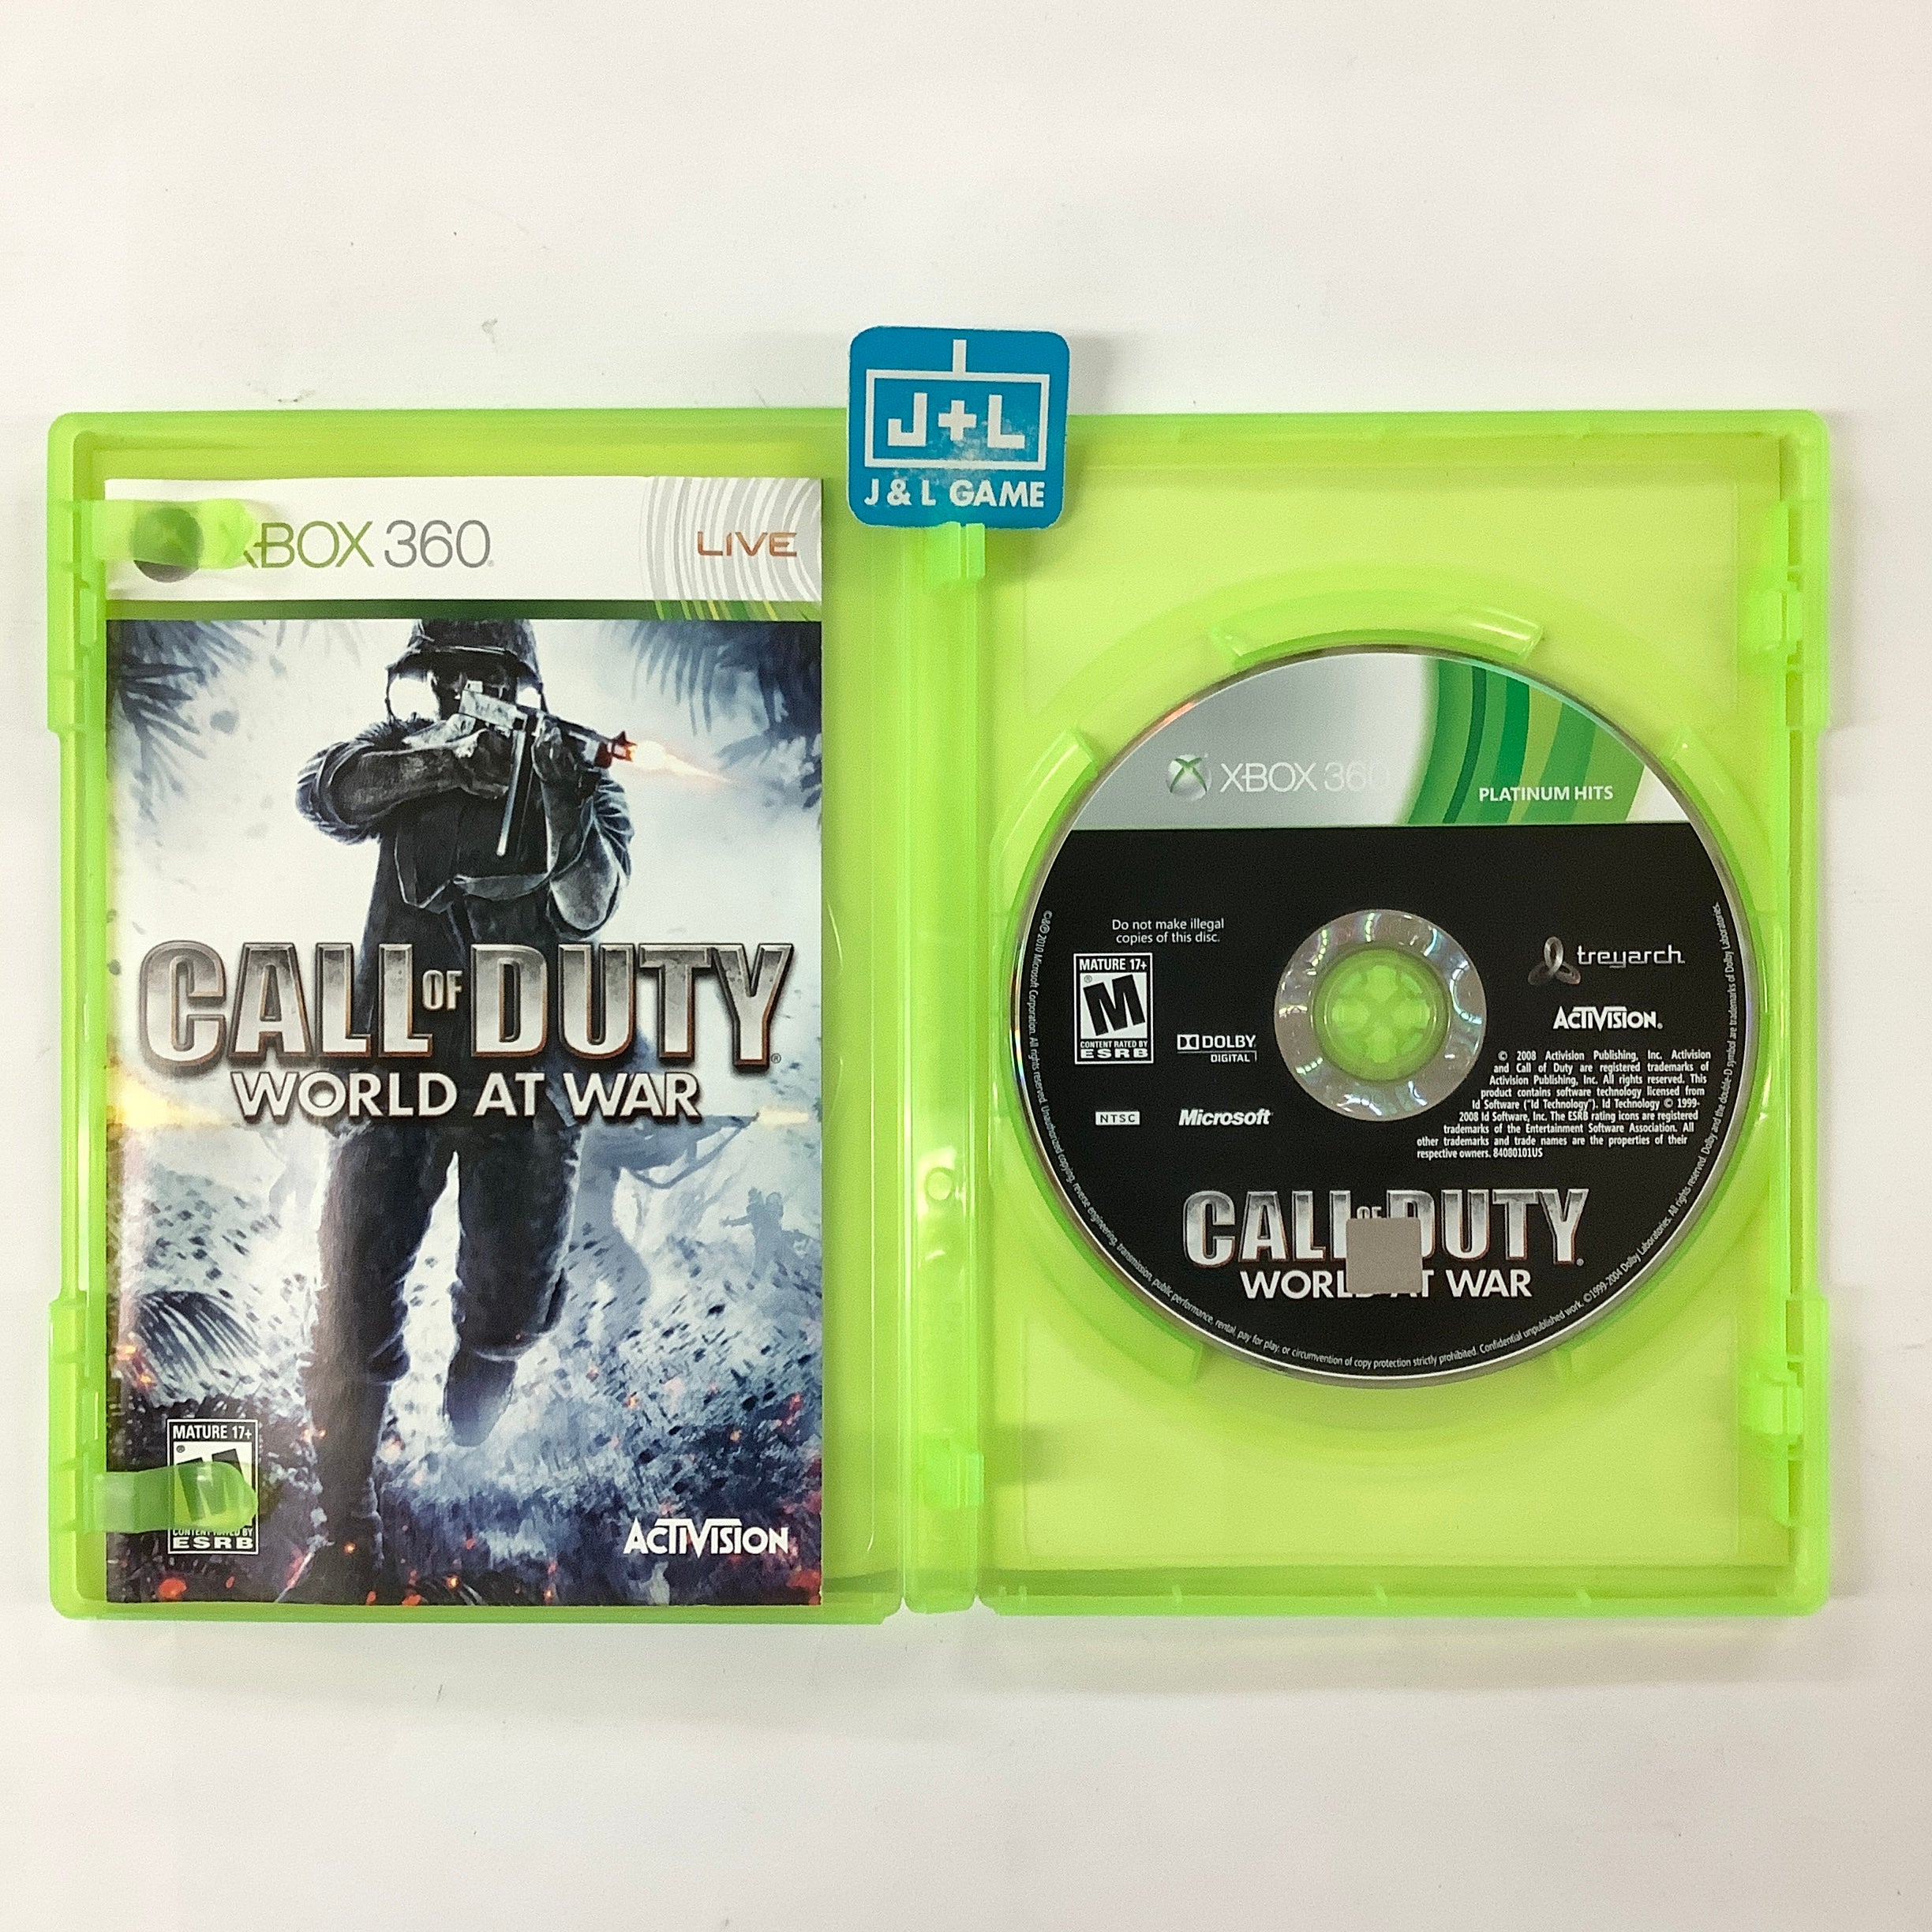 Call of Duty: World at War (Platinum Hits) - Xbox 360 [Pre-Owned] Video Games ACTIVISION   